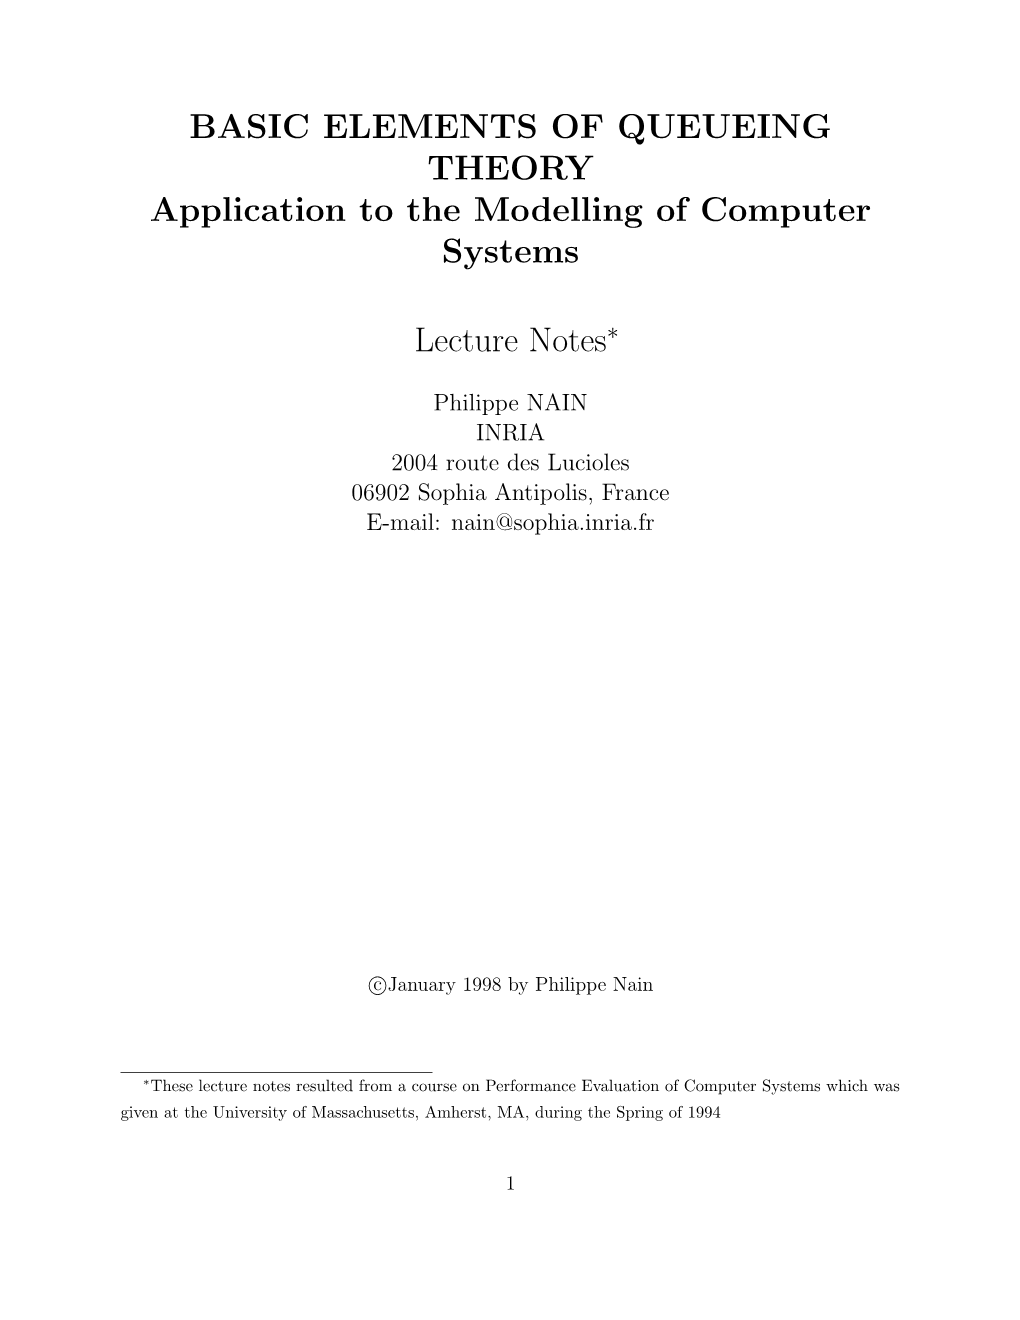 BASIC ELEMENTS of QUEUEING THEORY Application to the Modelling of Computer Systems